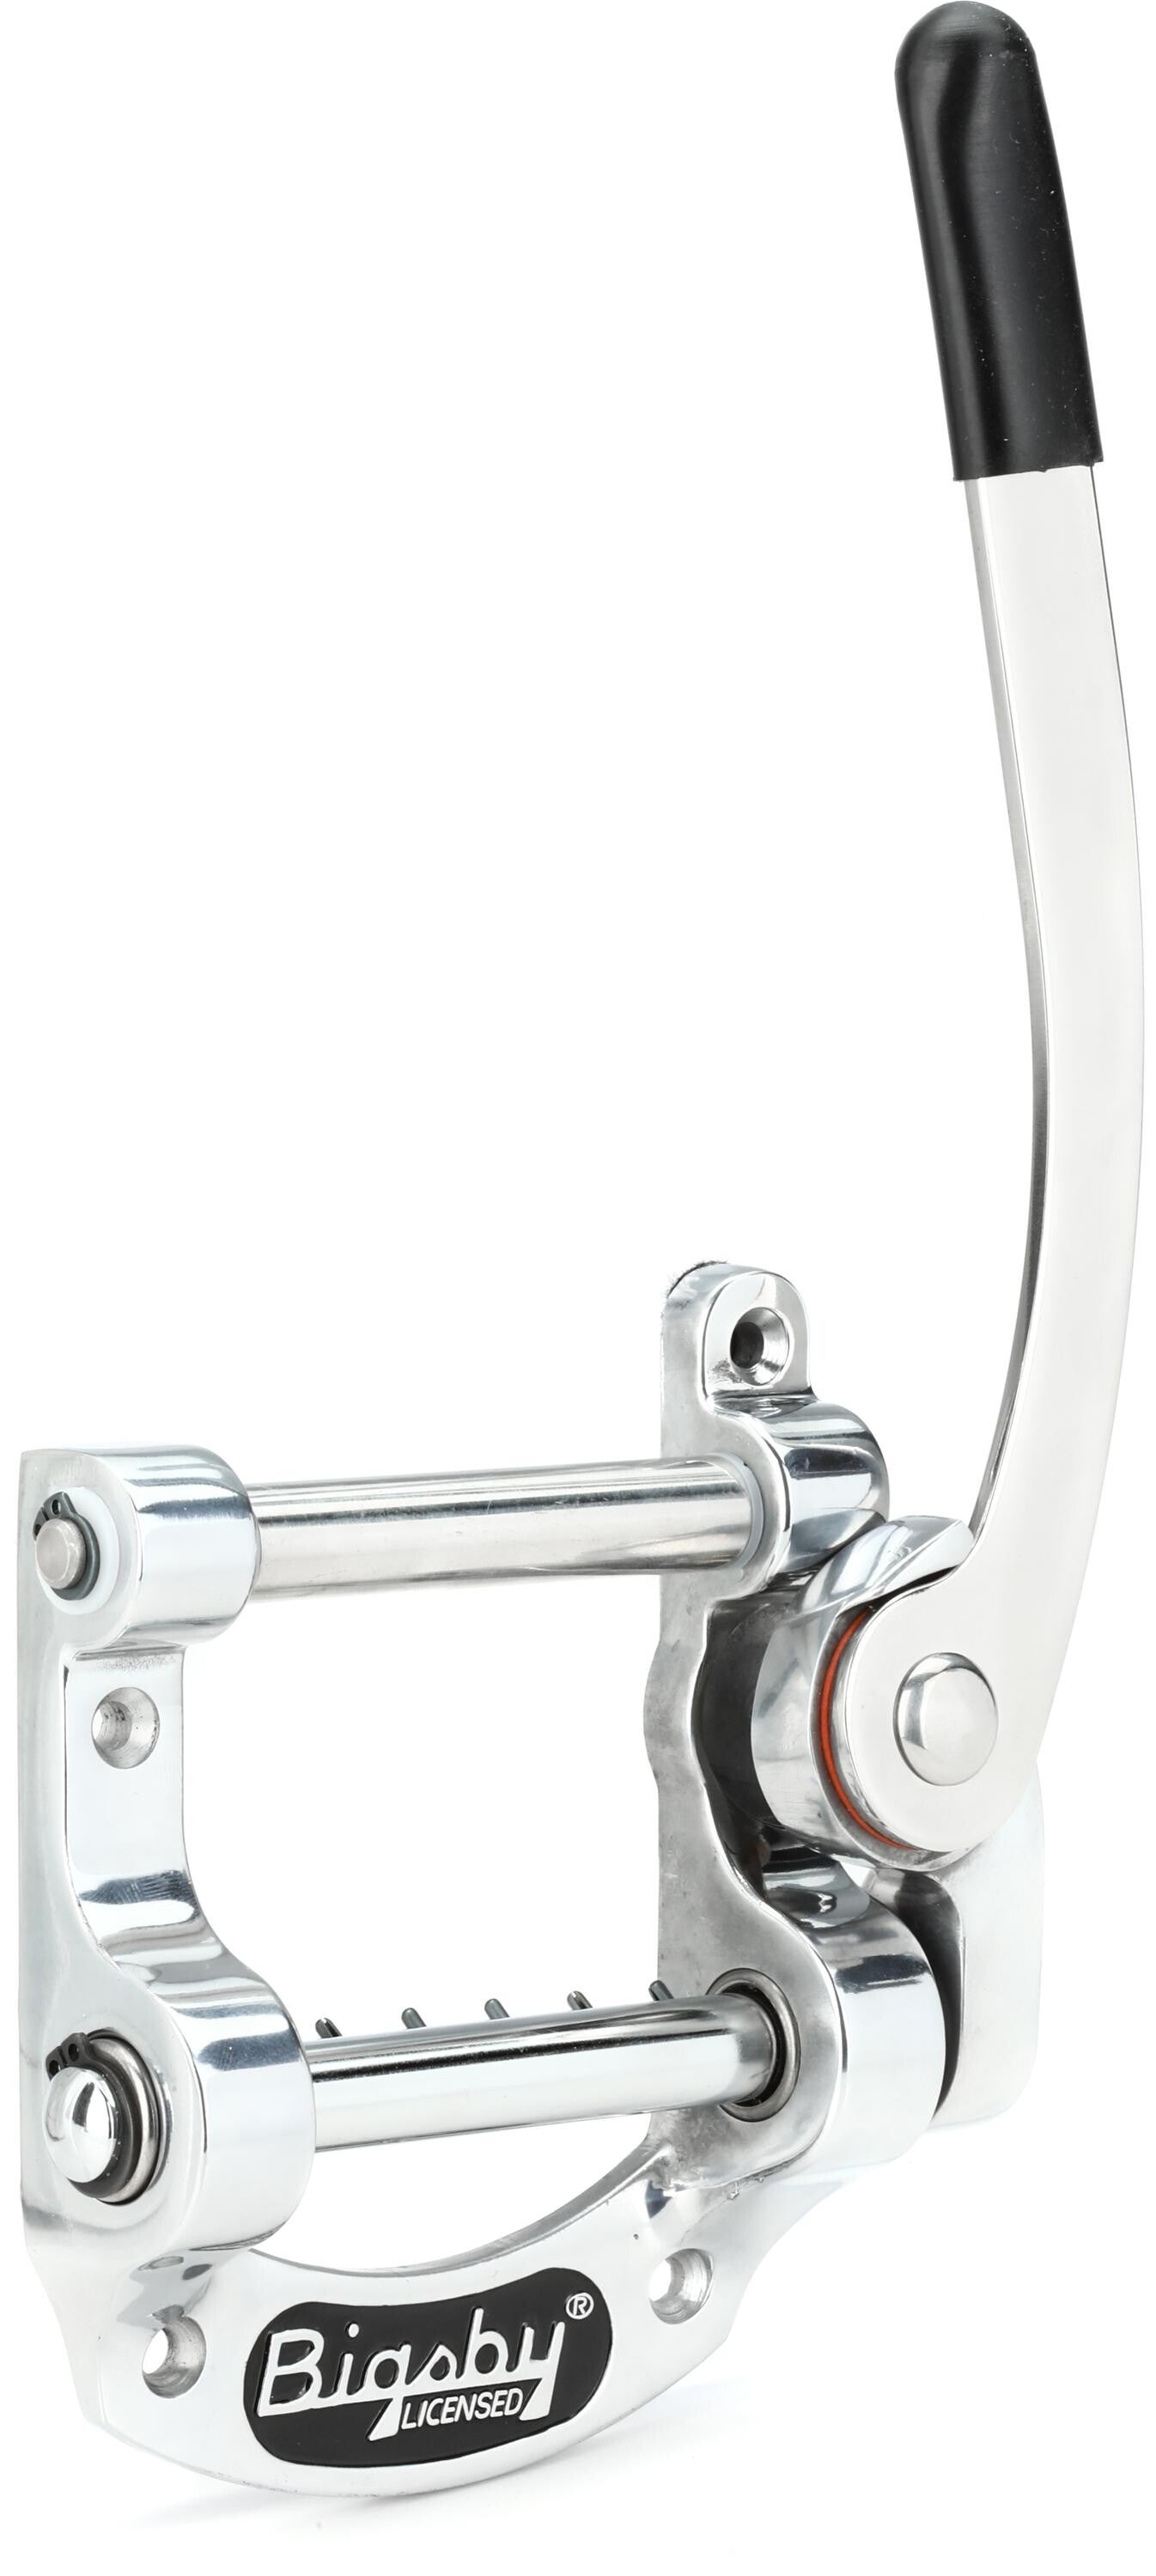 Bigsby B50 Vibrato Tailpiece Assembly - Aluminum